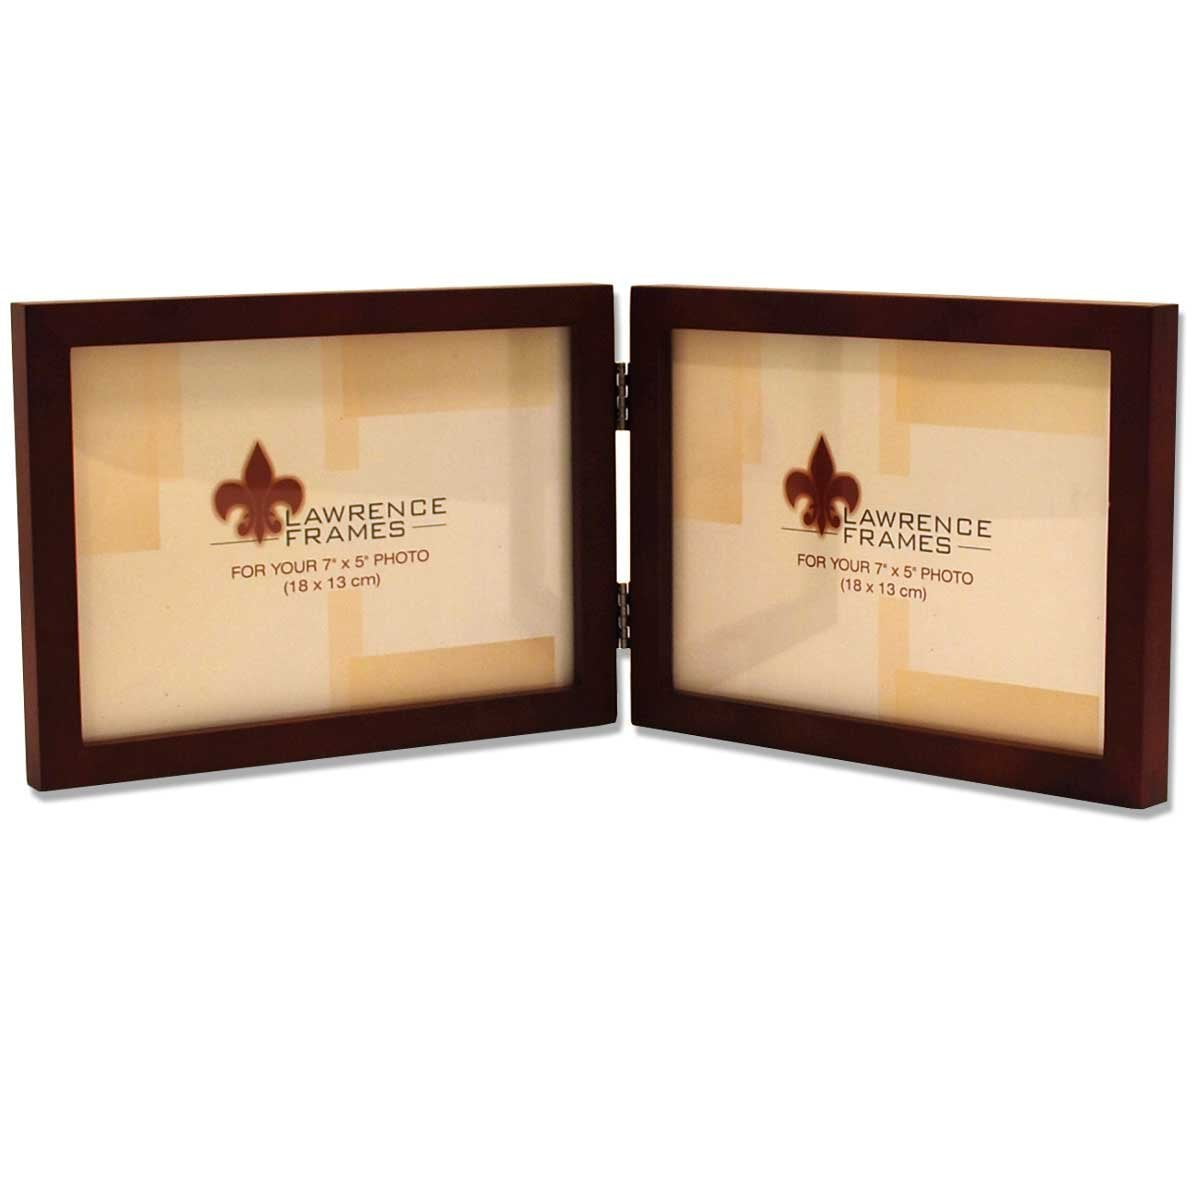 Gallery Collection Lawrence Frames Walnut Wood Picture Frame 5 by 7-Inch 